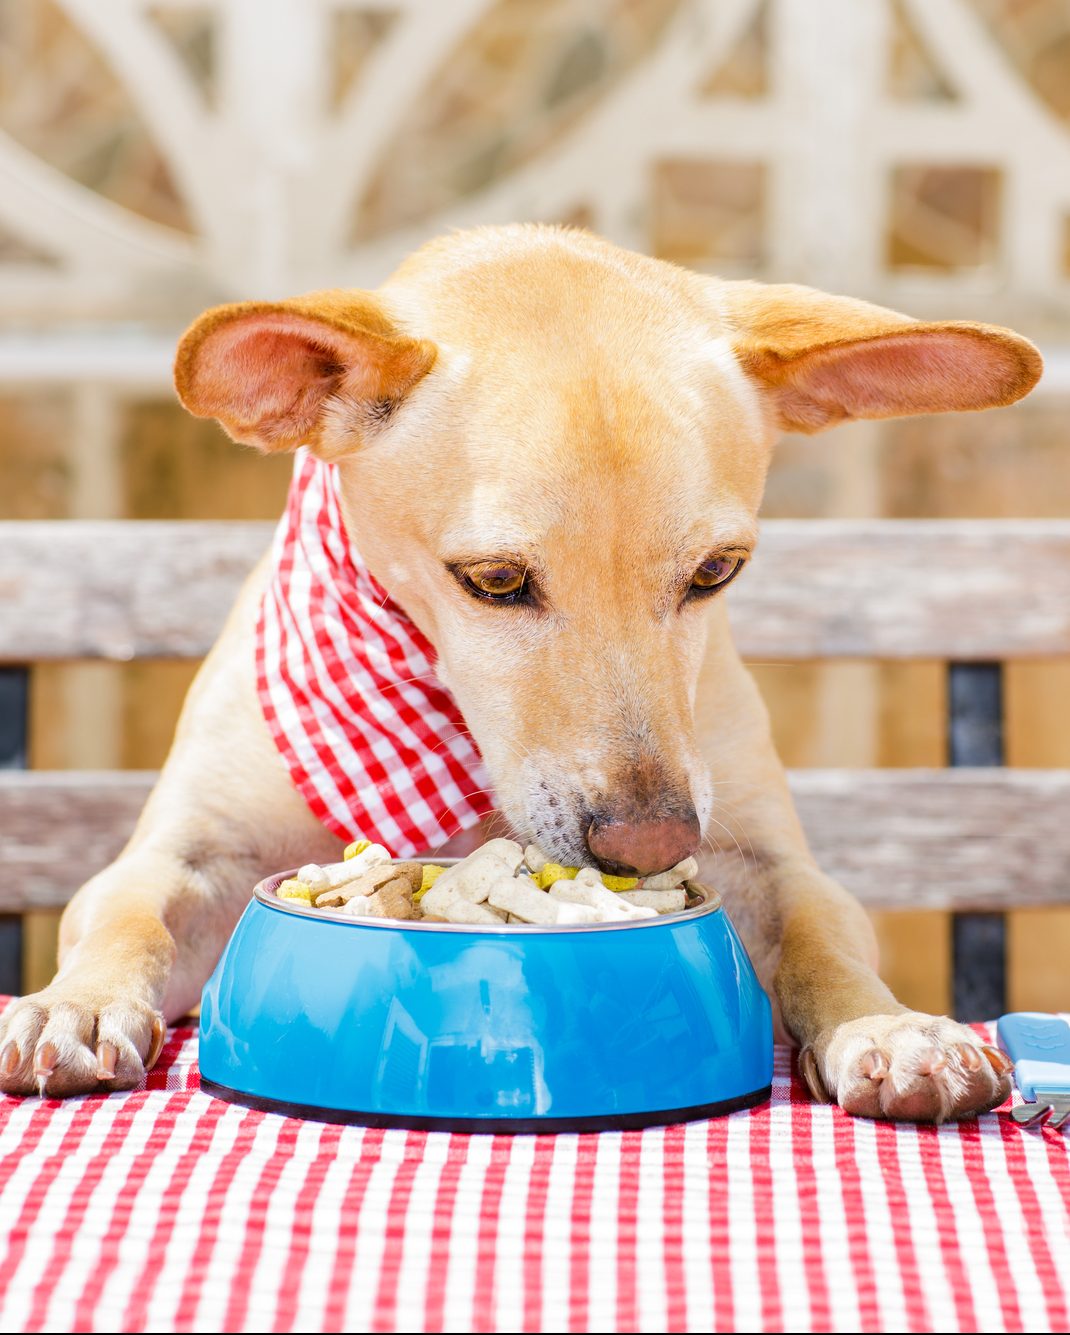 A dog eating from food bowl at table.